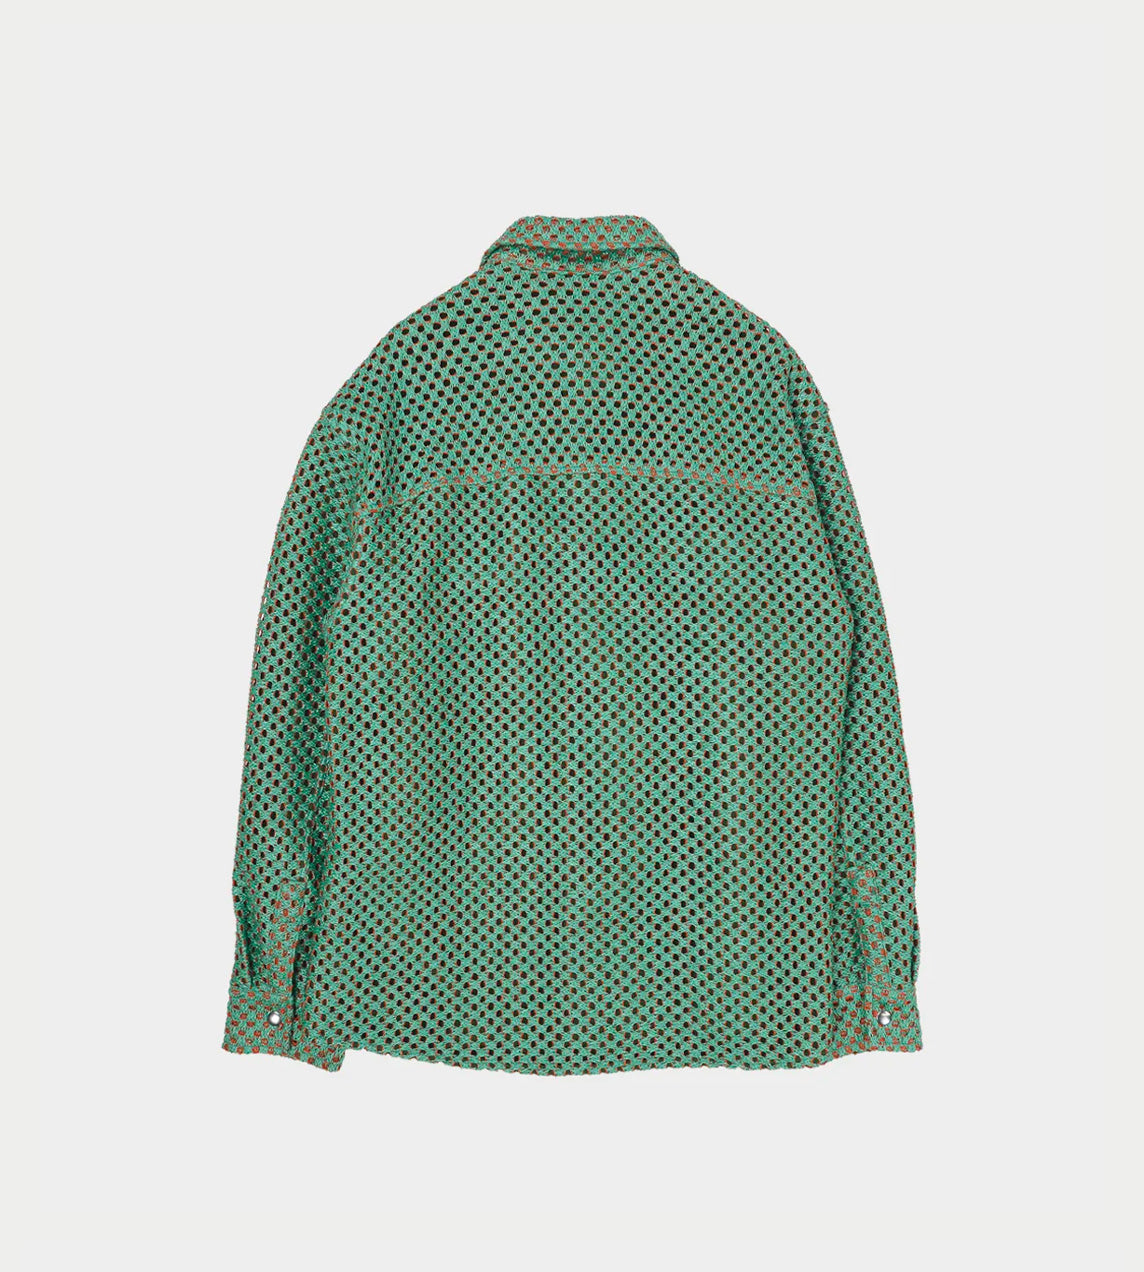 SONG FOR THE MUTE - Woven Straw Overshirt Green